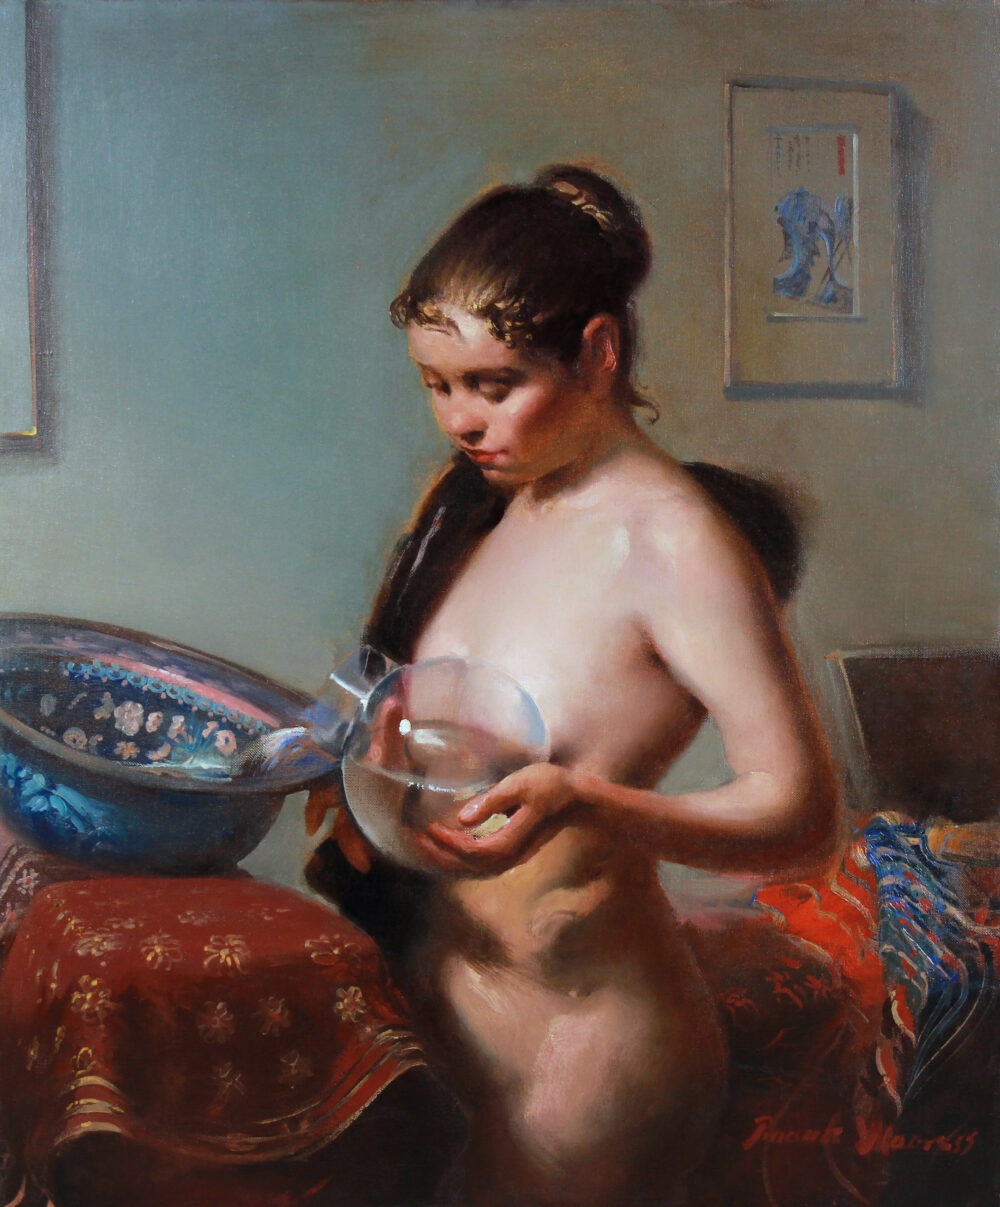 Young standing nude at the washbasin